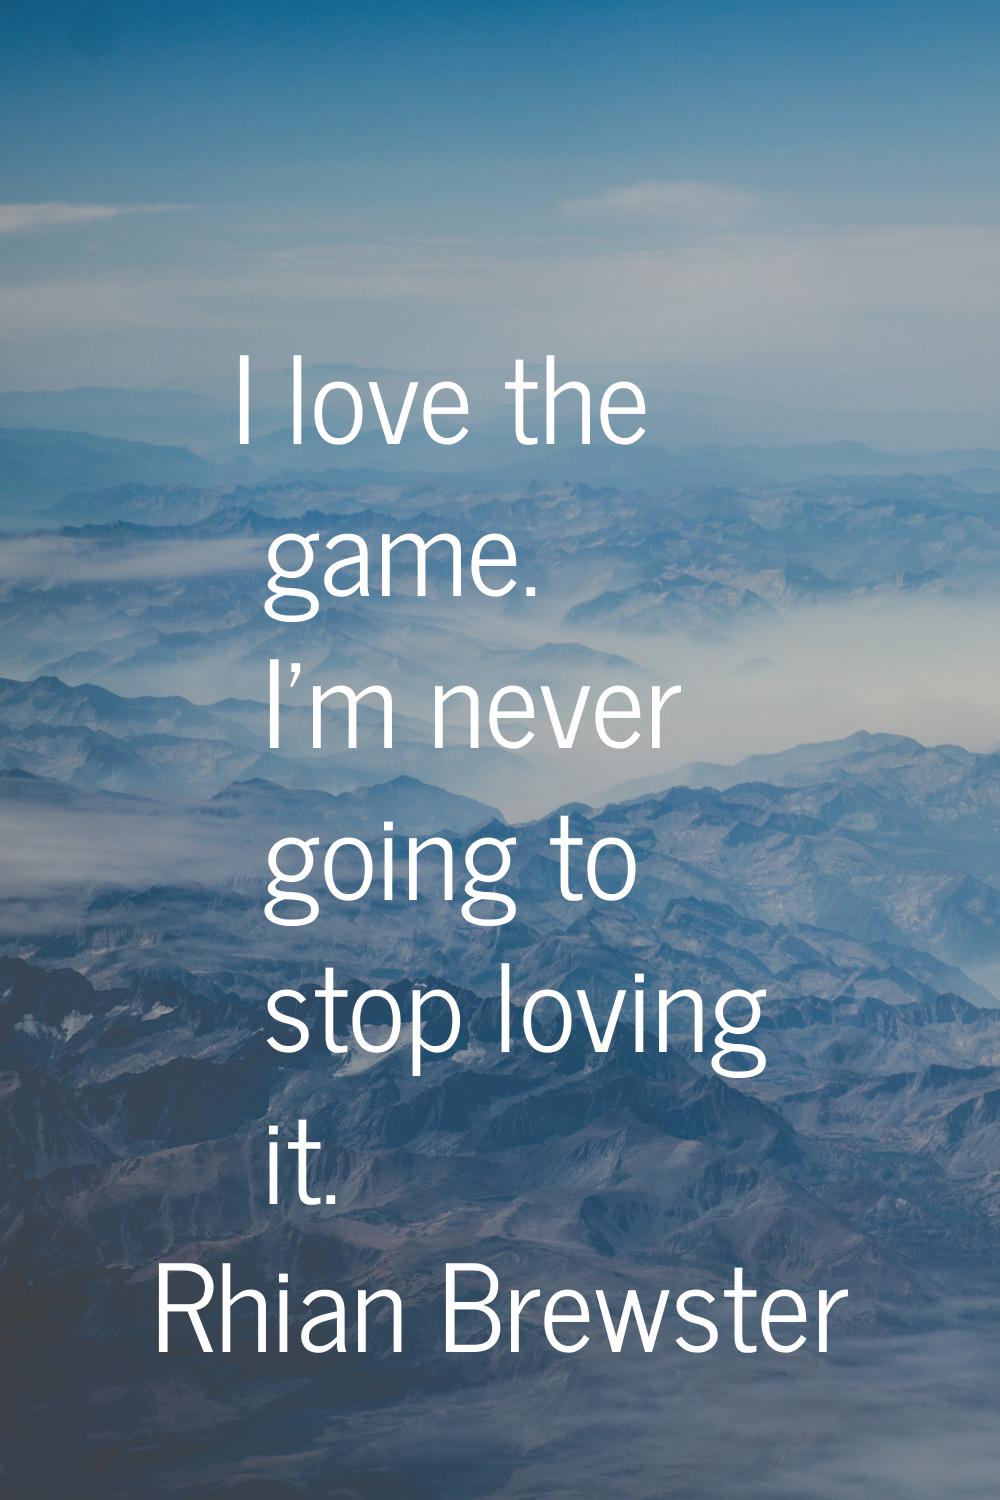 I love the game. I'm never going to stop loving it.